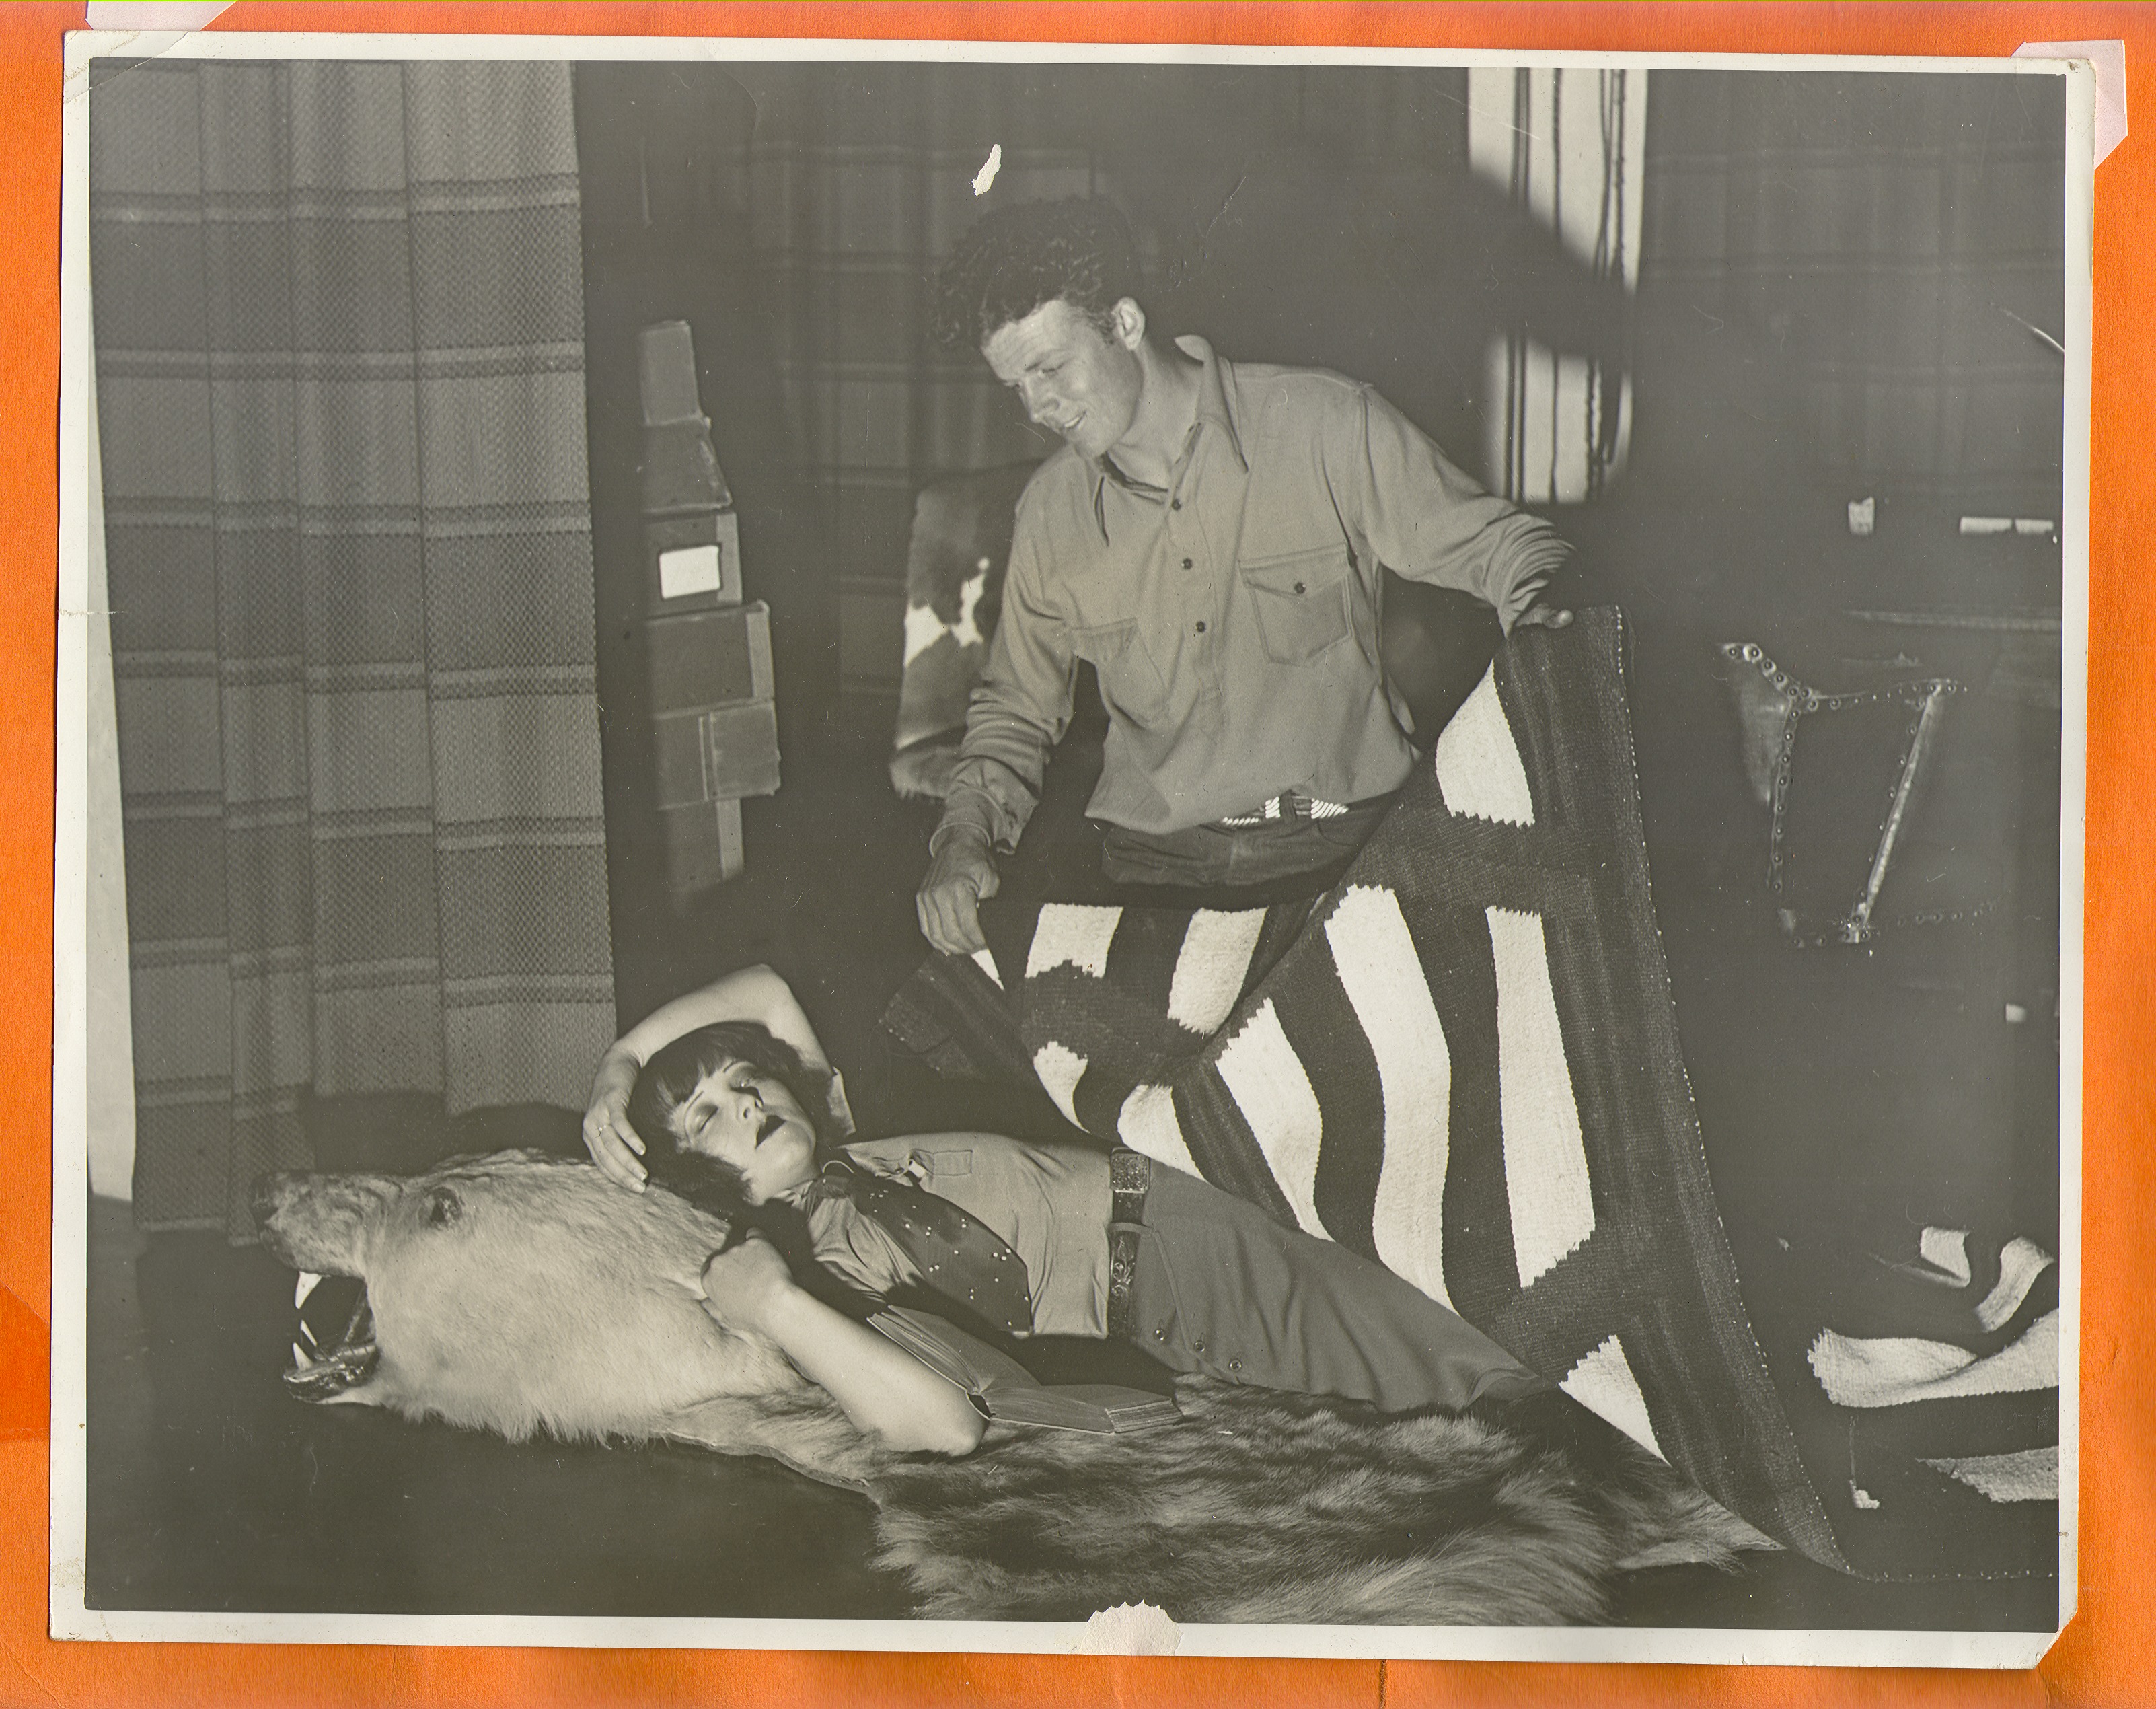 Clara Bow Bell and Rex Bell in what appears to be a movie scene: photographic print